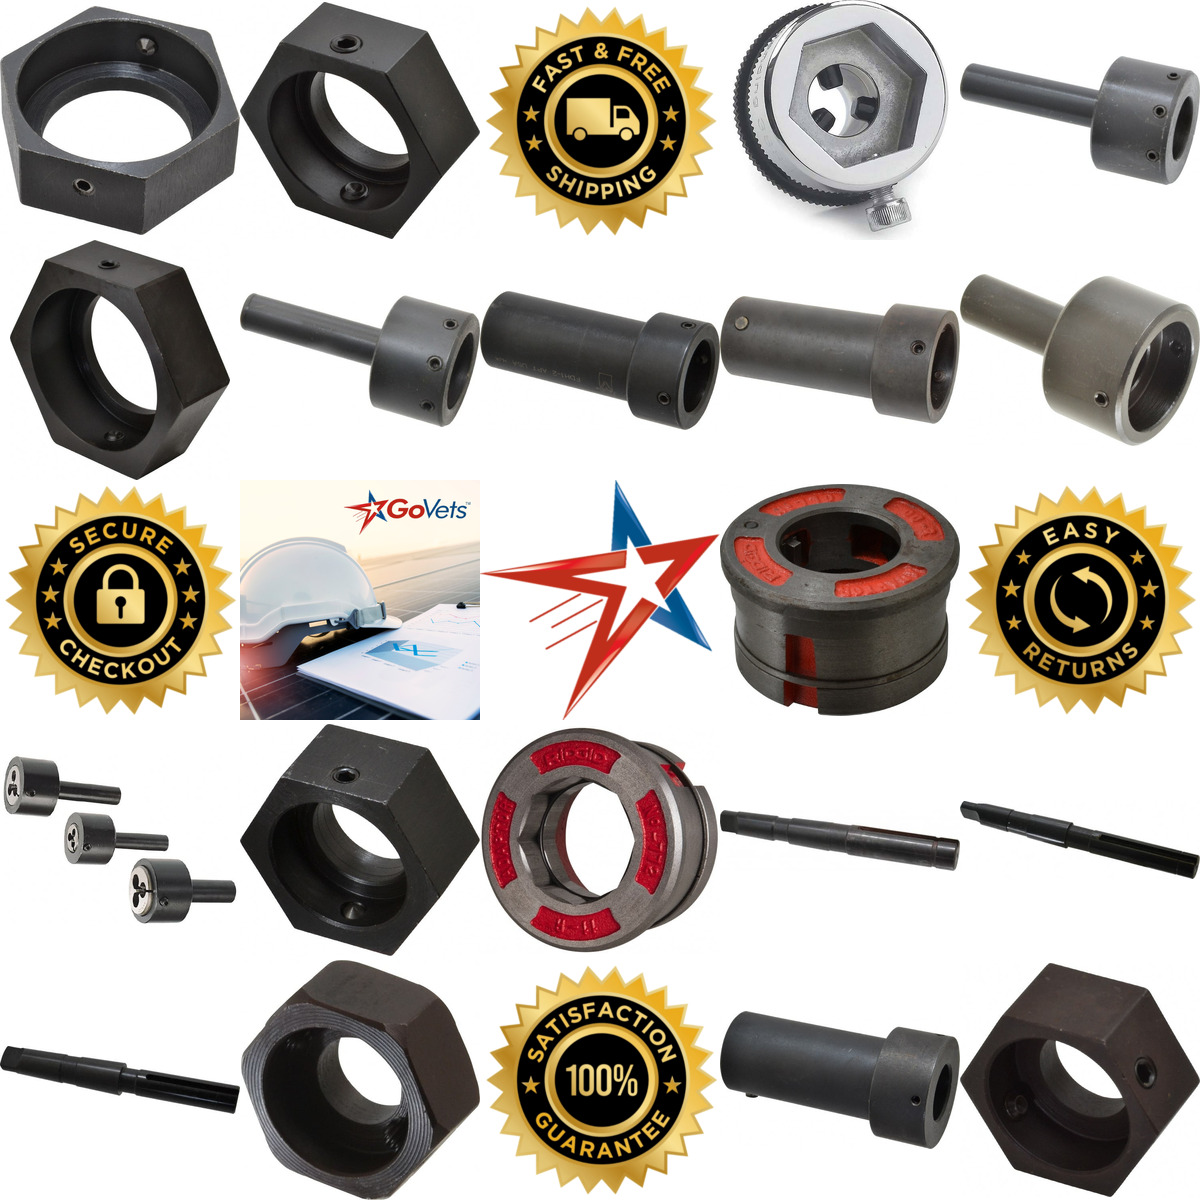 A selection of Die Holders and Accessories products on GoVets